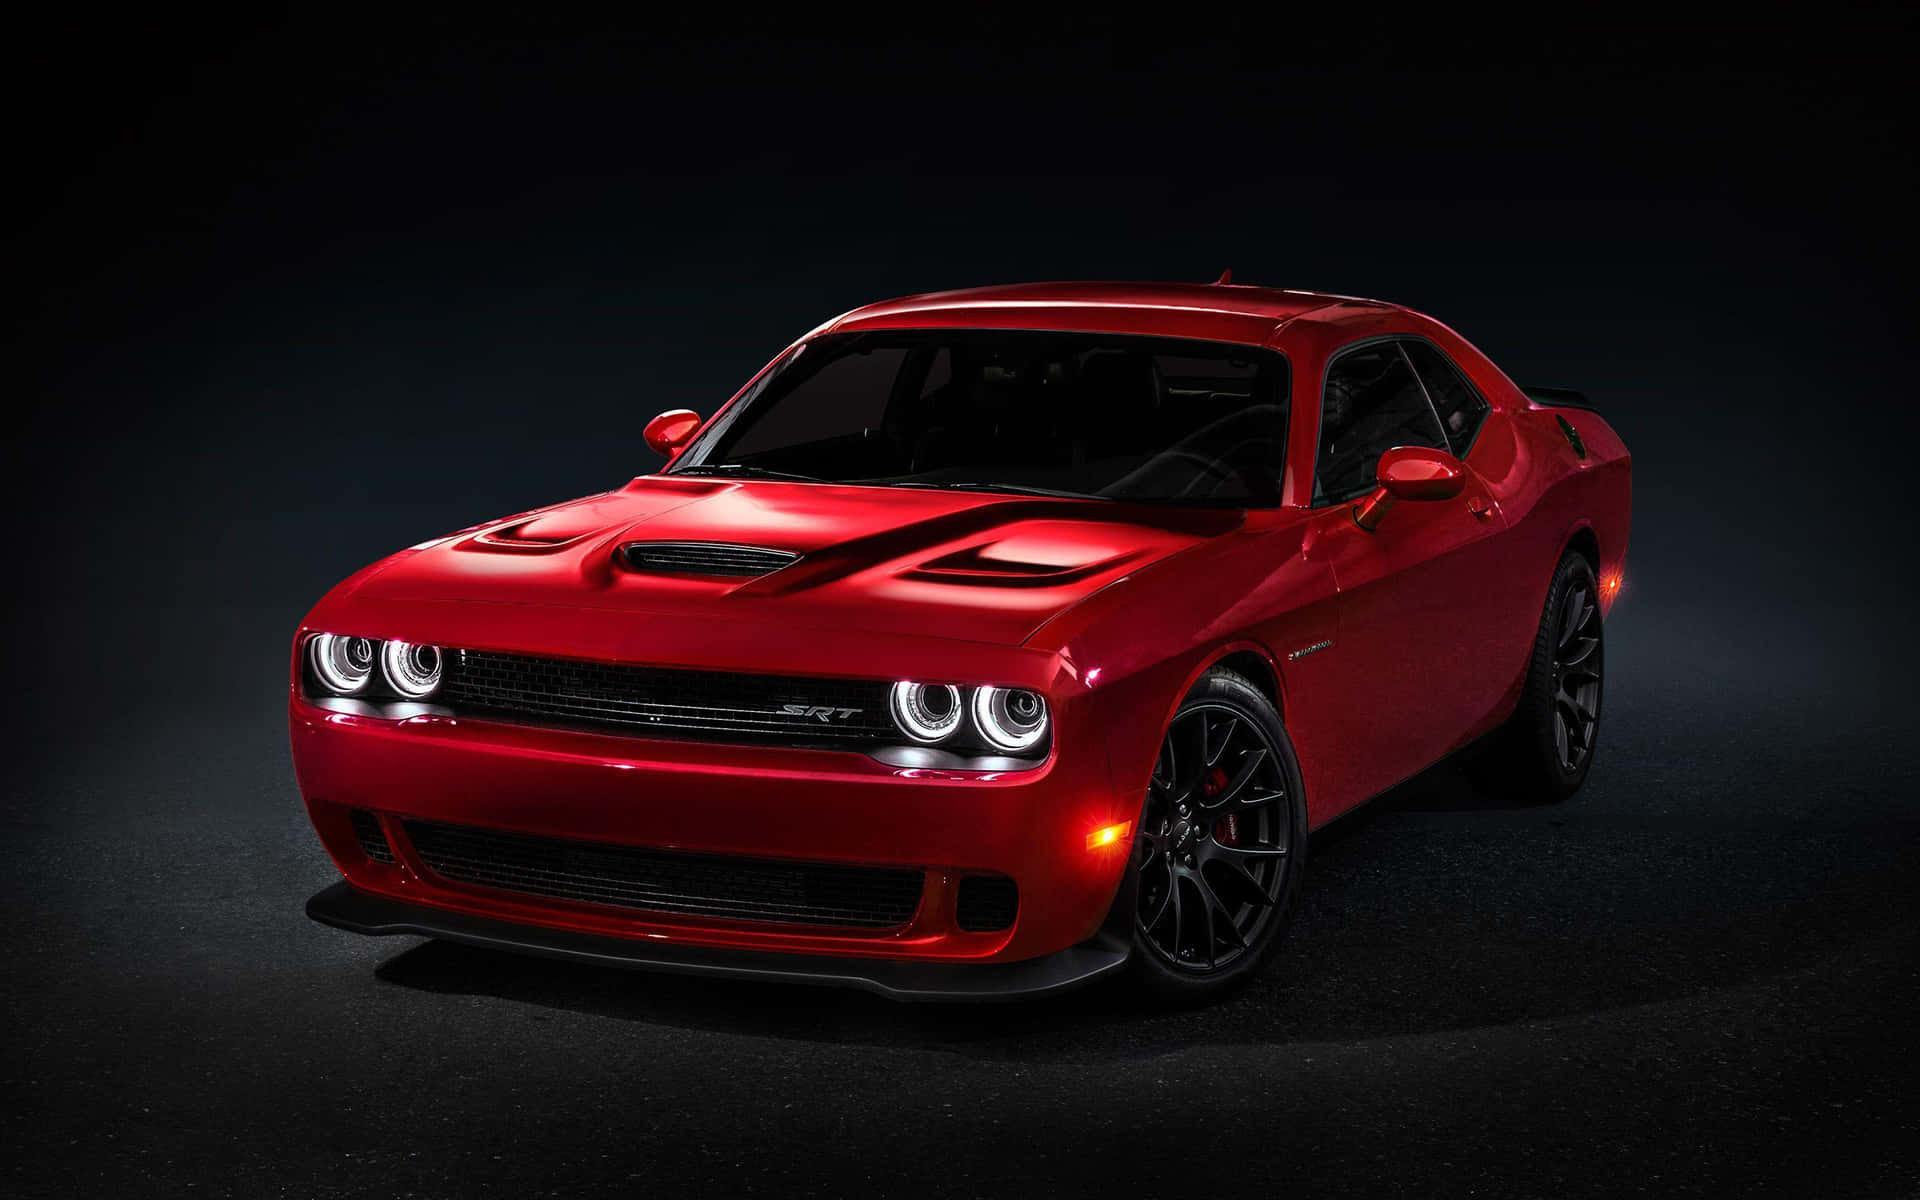 The Red Dodge Challenger Is Shown In A Dark Room